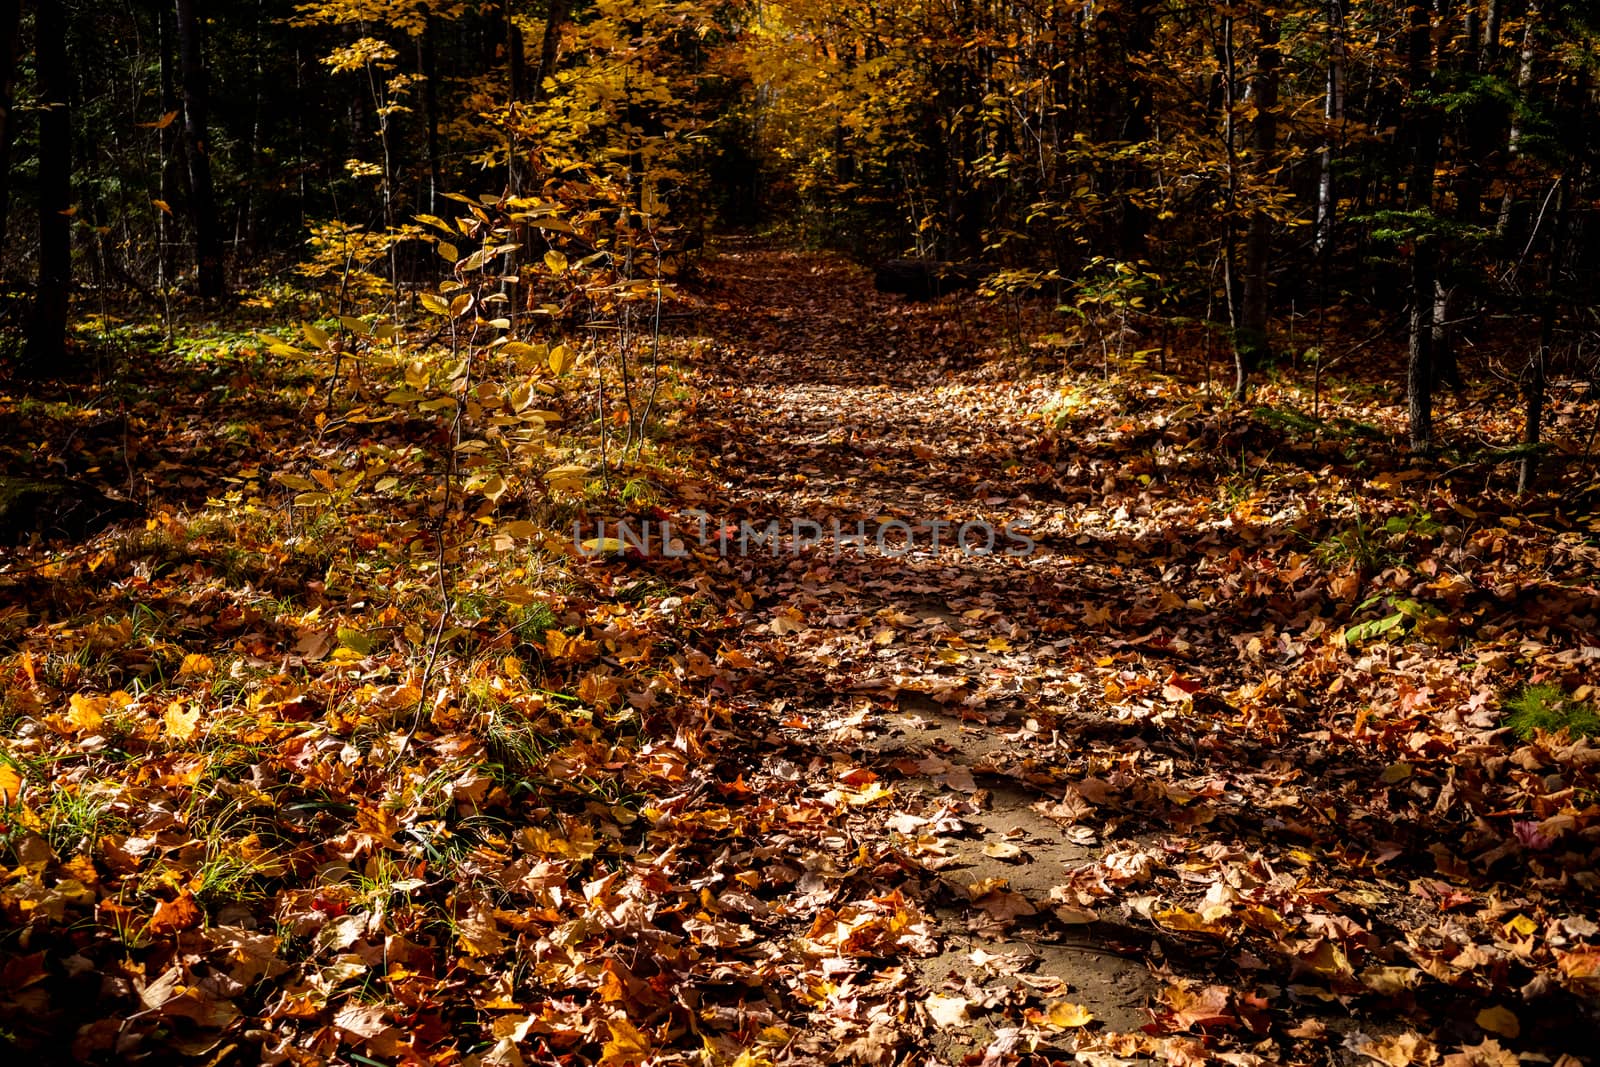 Tree shadows form pattern across autumn trail by colintemple